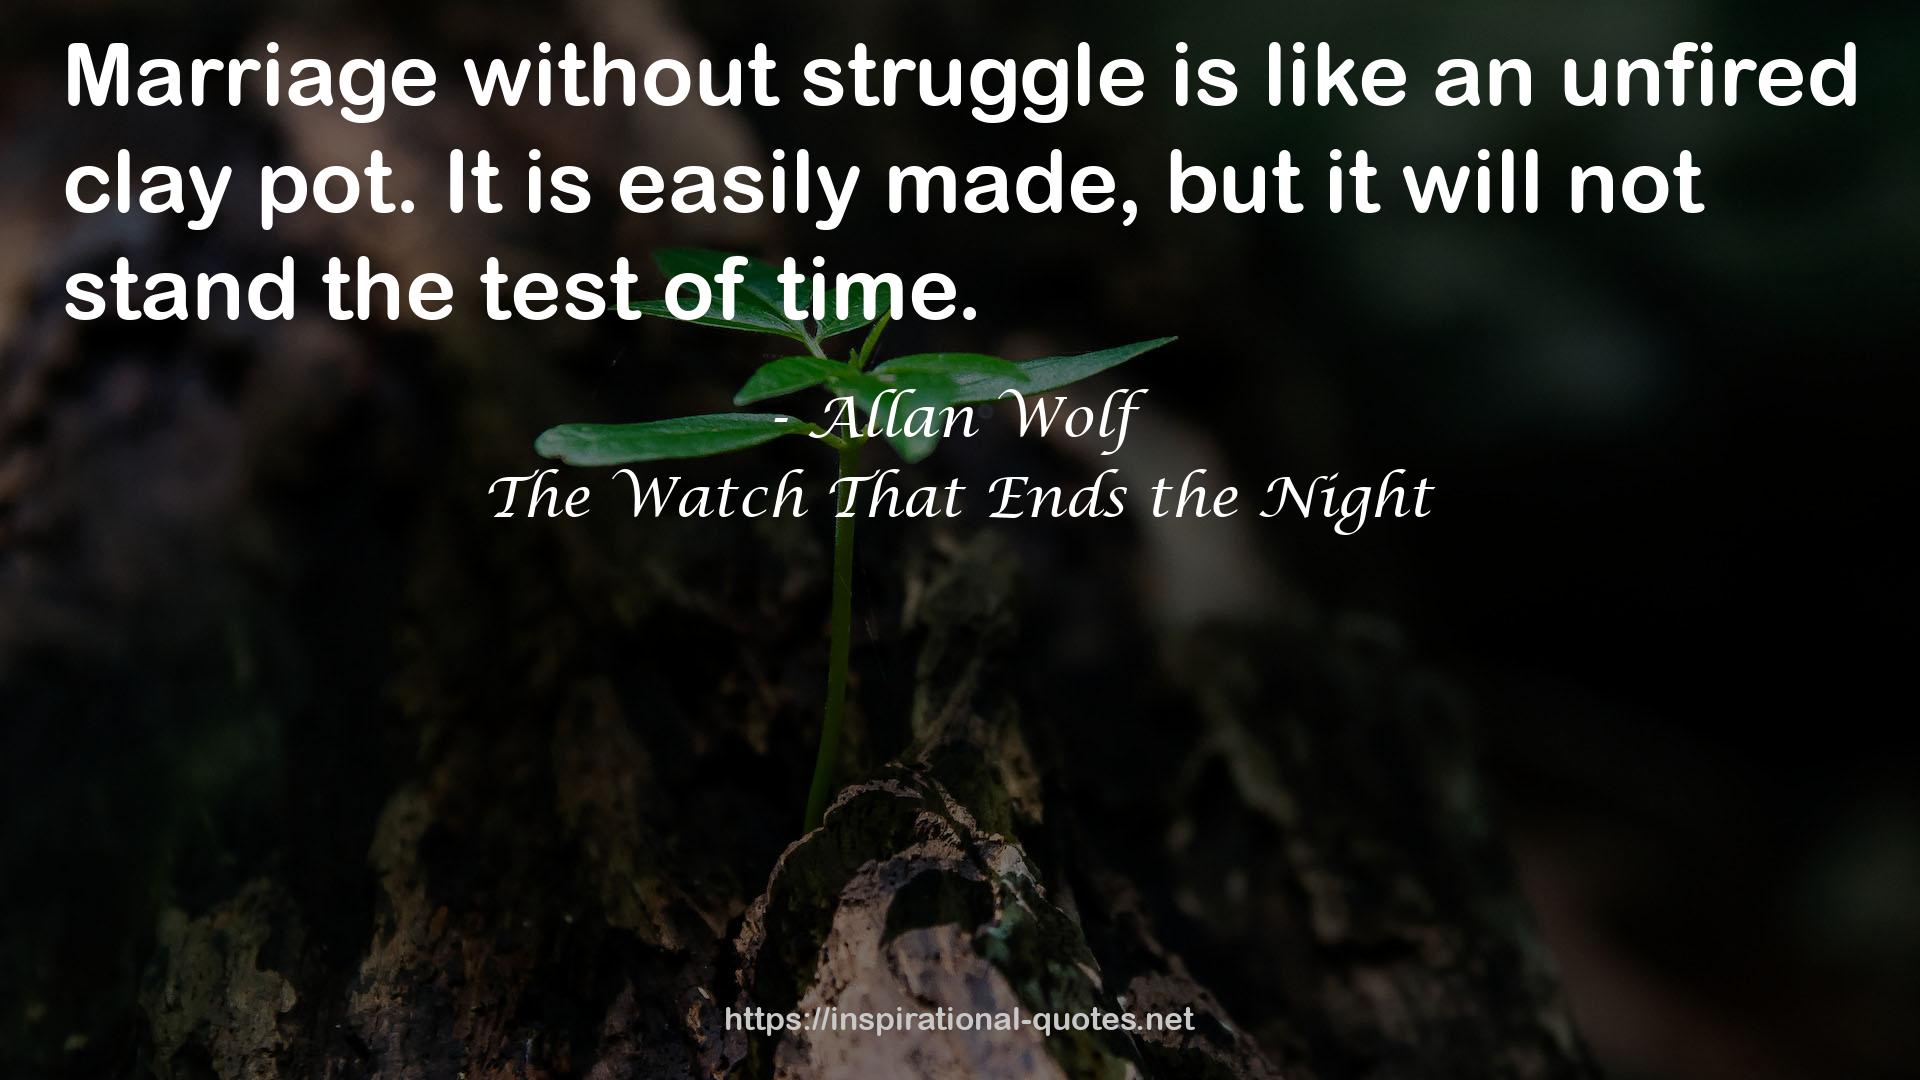 Allan Wolf QUOTES